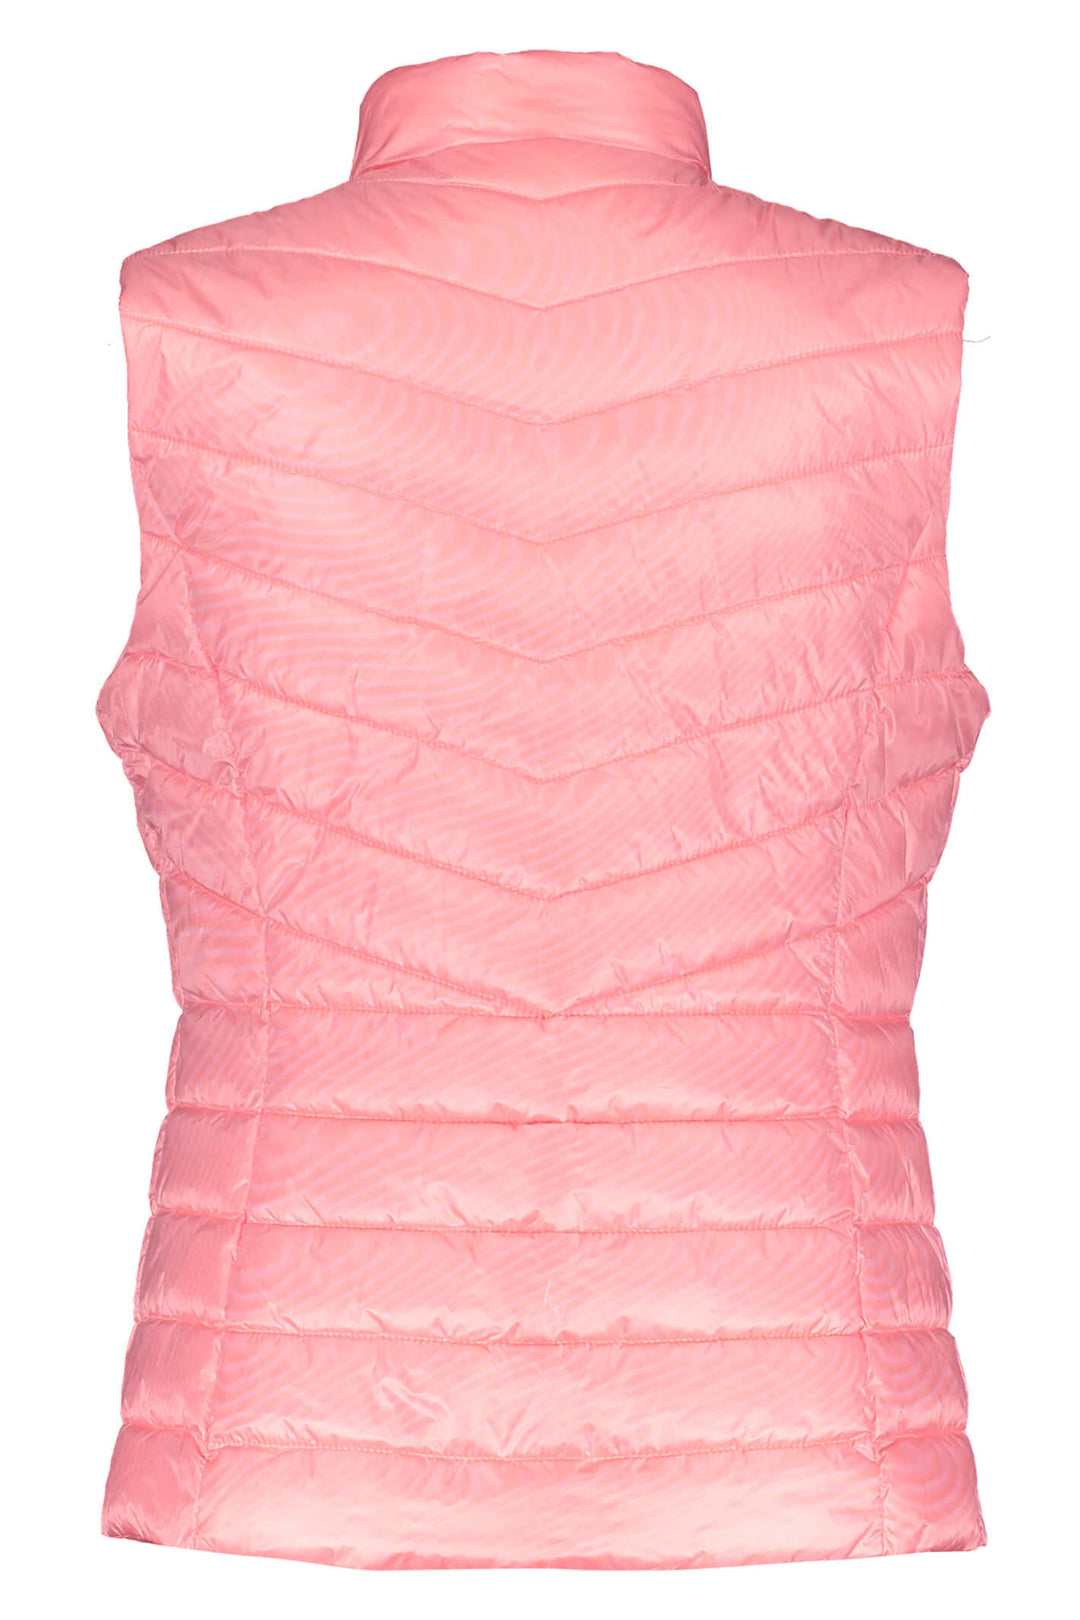 Gerry Weber 94110 Pink Candied Padded Gilet - Dotique